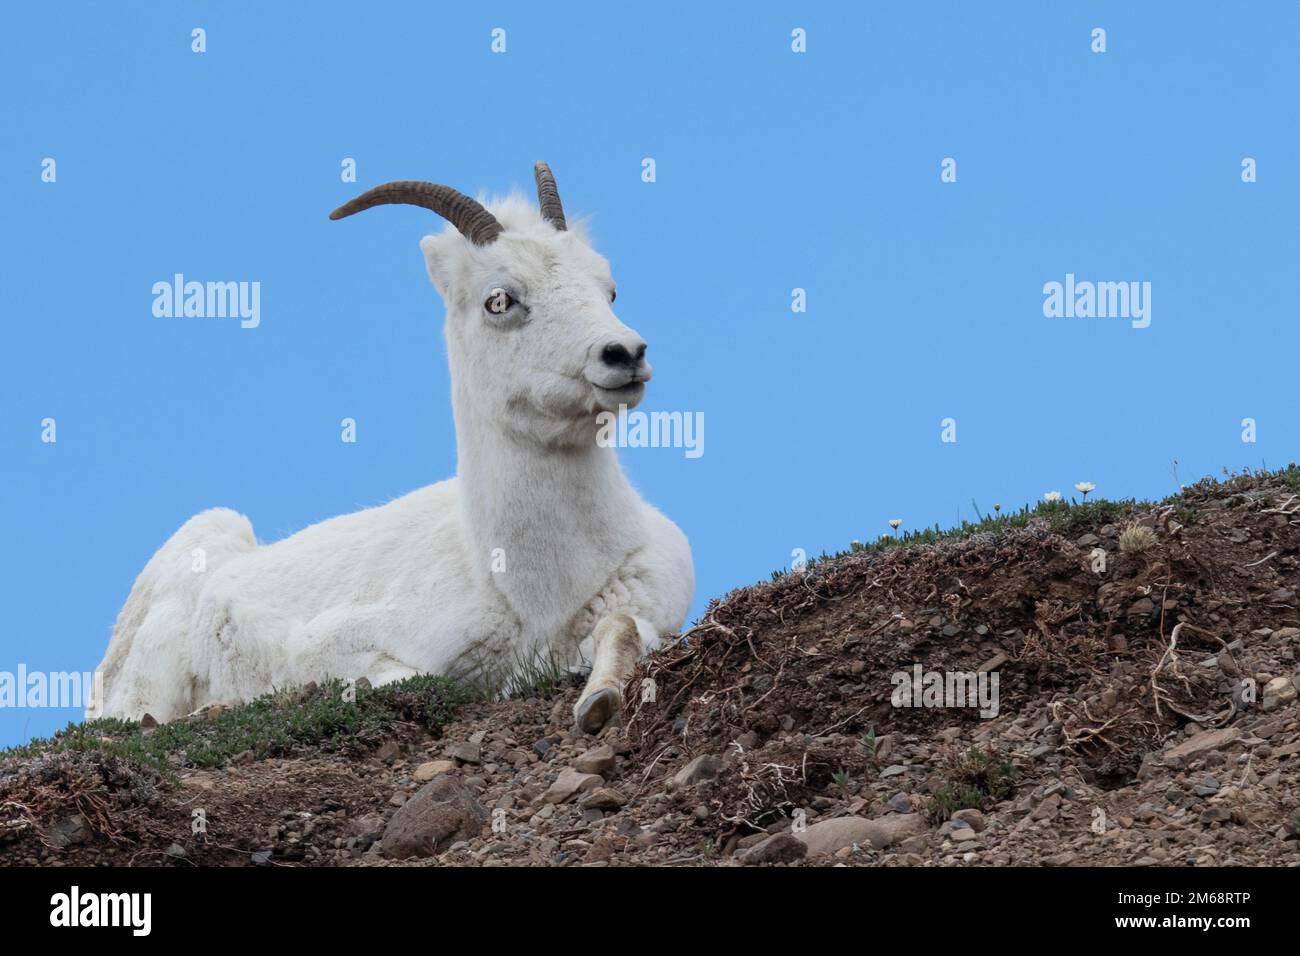 Alaskan all white wild Dall Sheep with detailed curved horns rests on ridge with leg hanging over side against bright blue sky as background Stock Photo